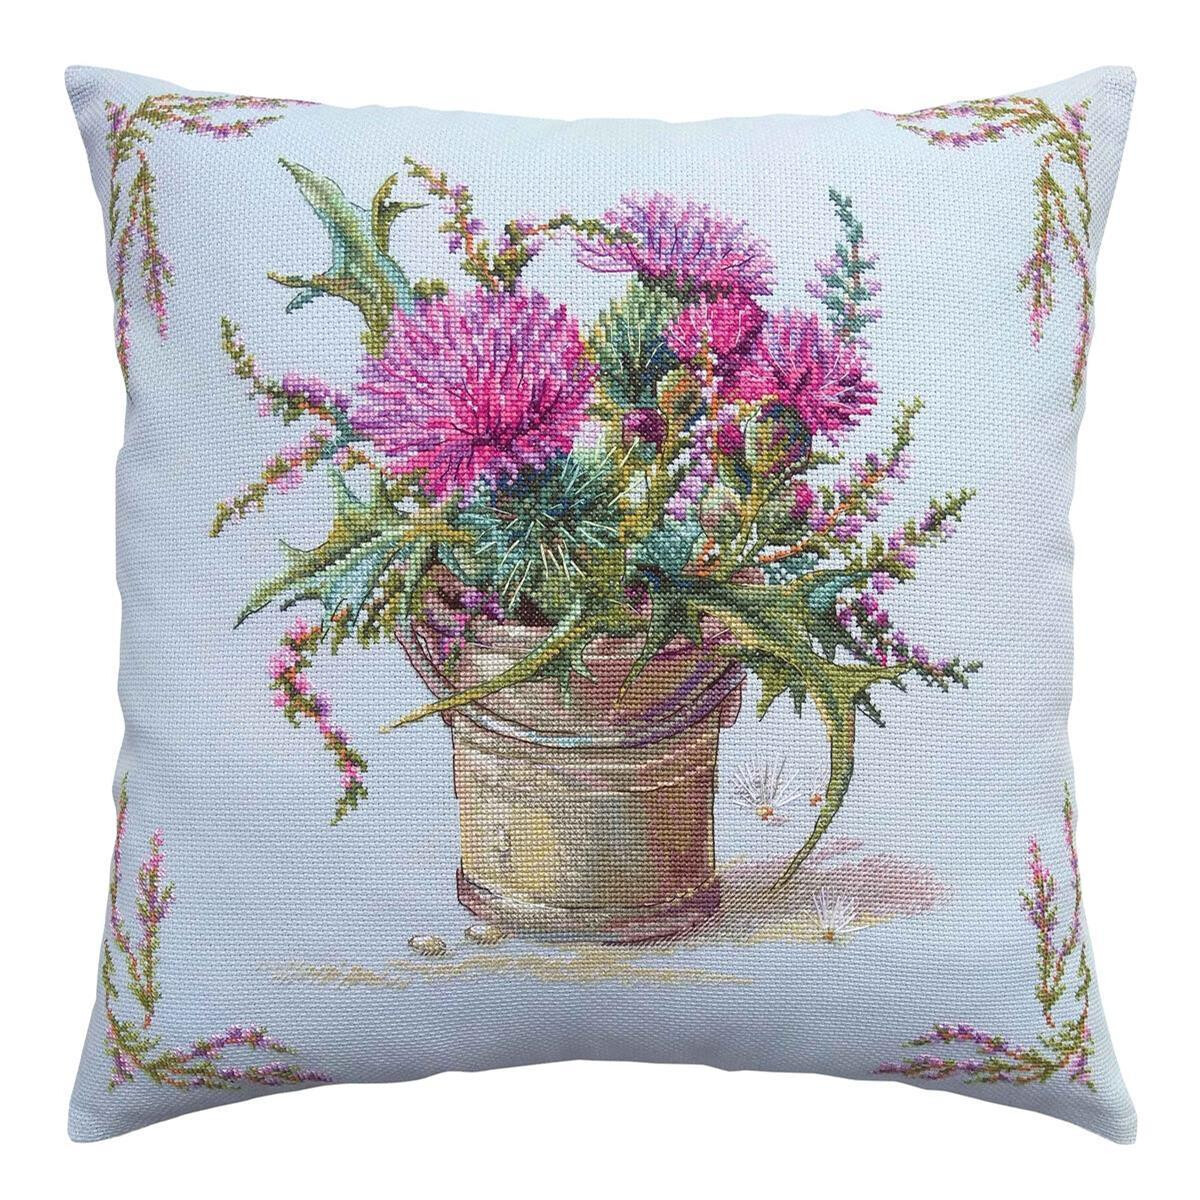 RTO counted Cross Stitch Kit cushion "Thistle and...